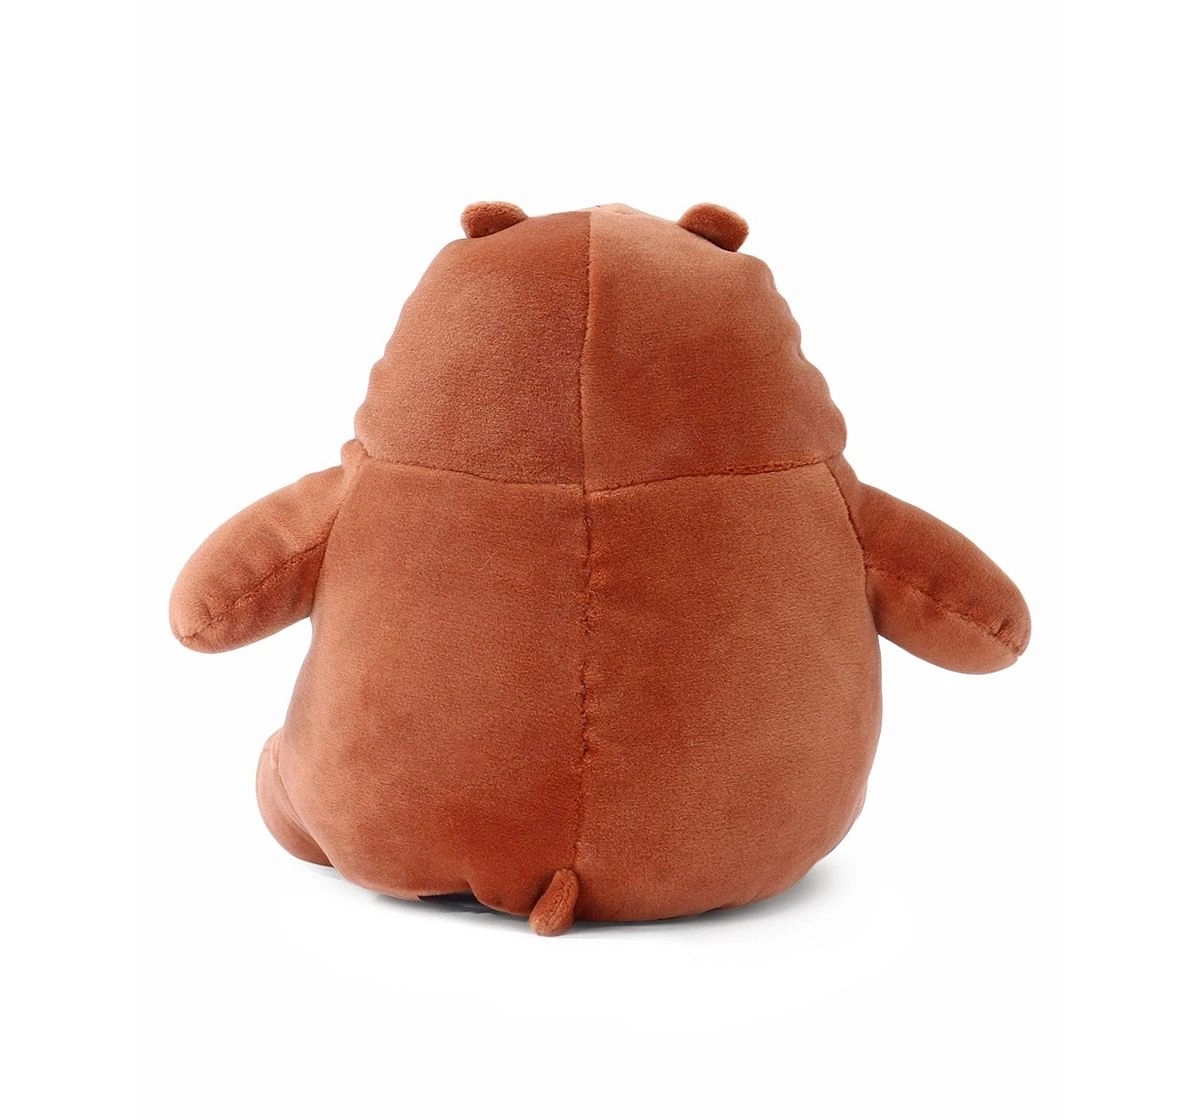 We Bare Bears We Bare Bear Sitting Grizzly Bear Plush 20 Cm Character Soft Toys for Kids age 1Y+ - 20 Cm (Brown)